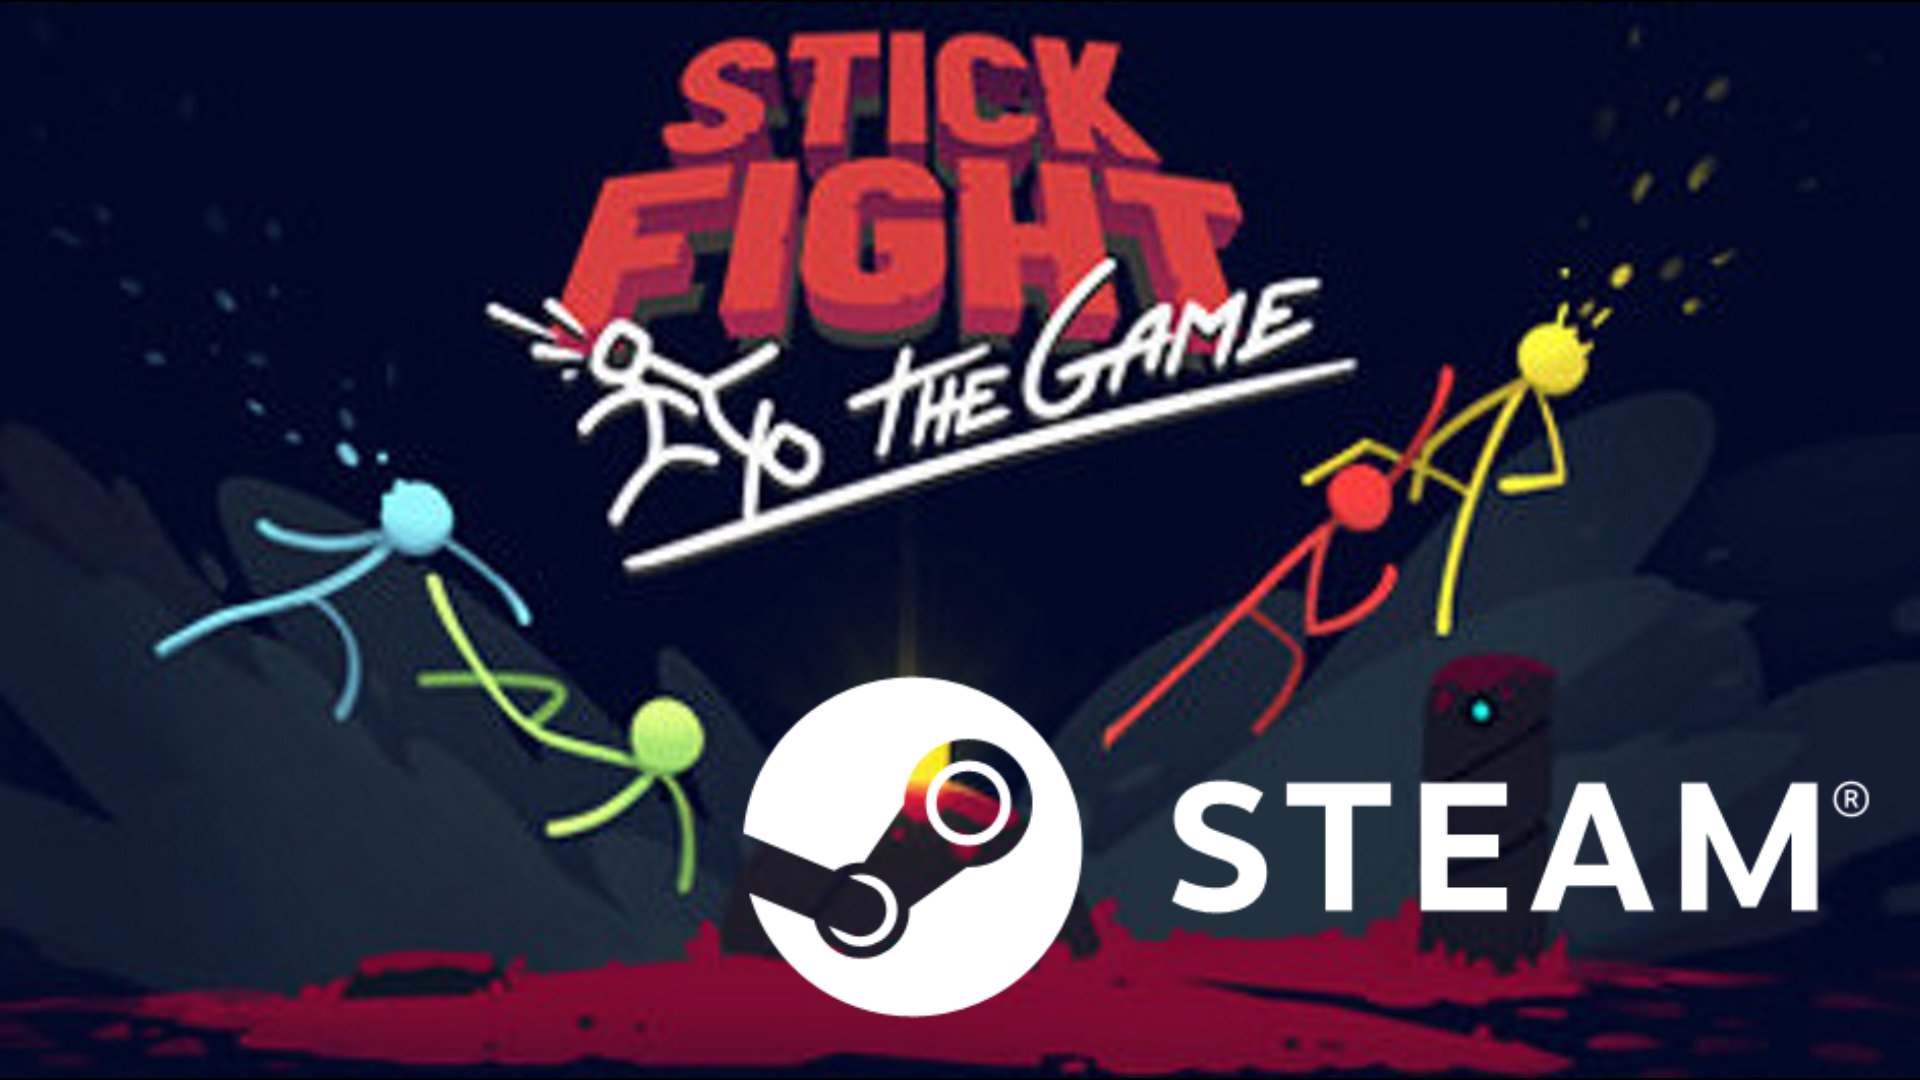 Stick fight steam is not фото 6